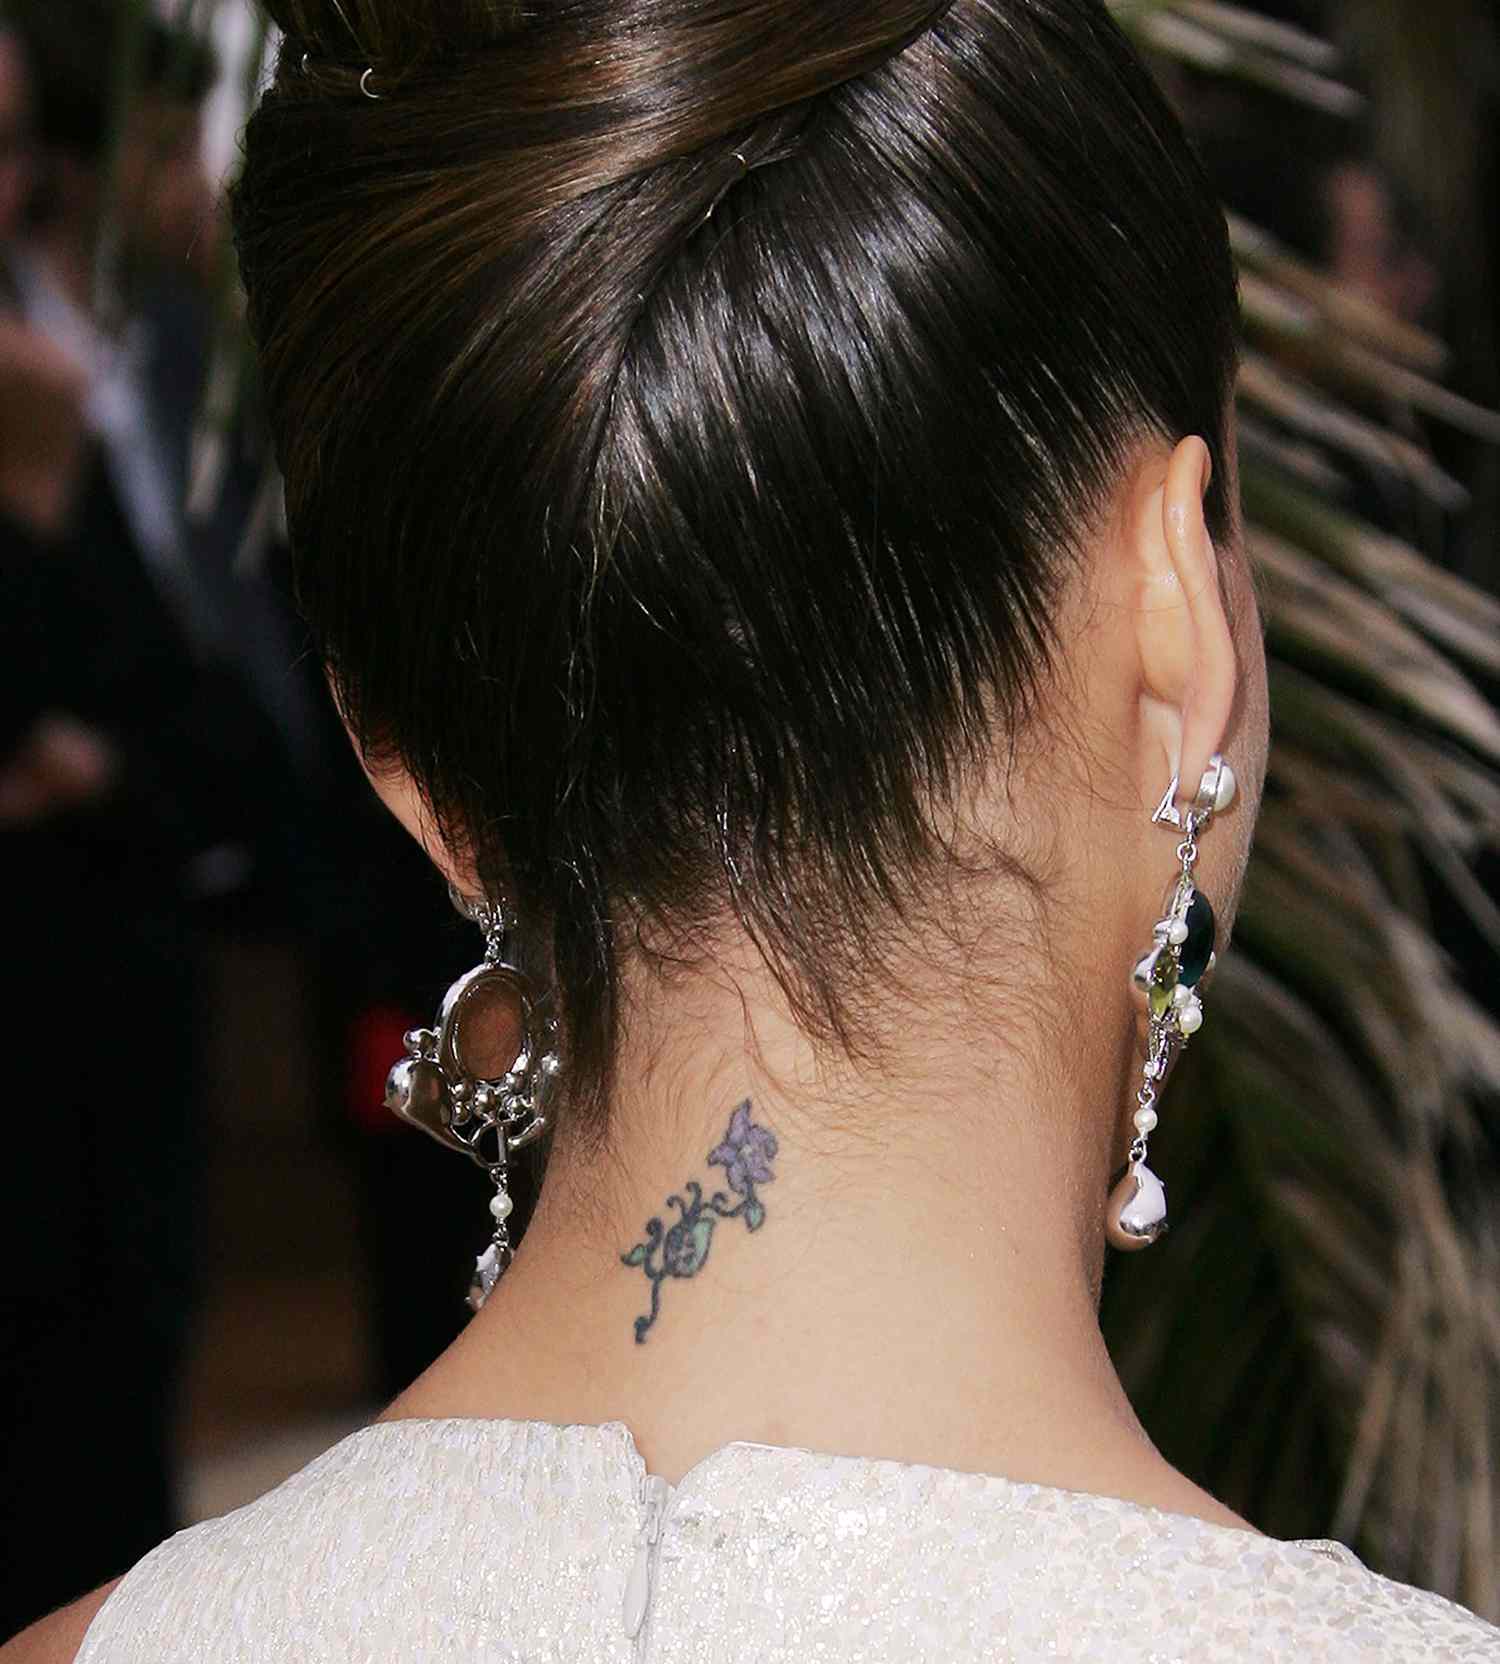 Jessica Alba Talks About Regretting Her Lower Back Tattoo People Com Lots of you asked what tattoo i was contemplating for myself. jessica alba talks about regretting her